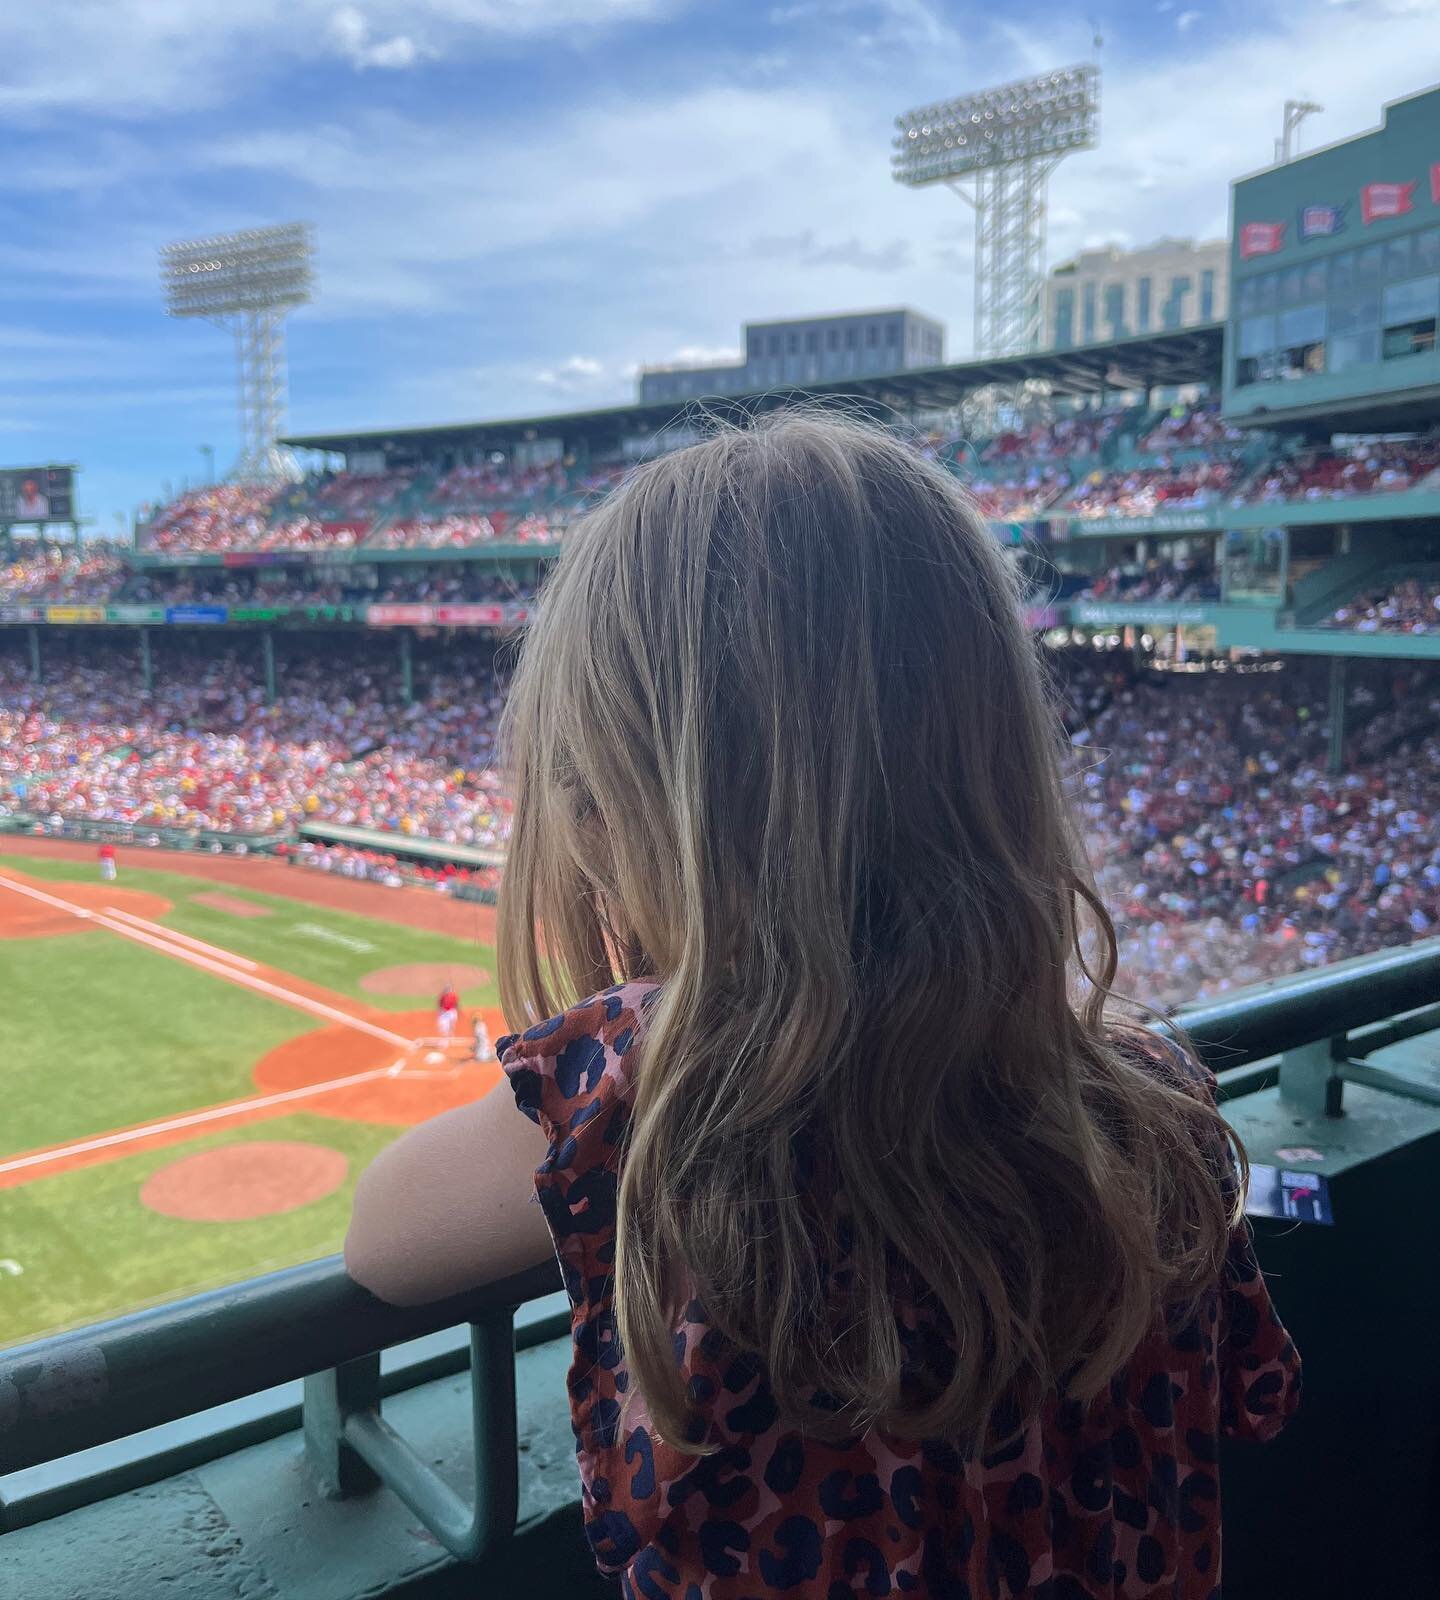 living the suite life at @redsox family day this weekend 💛💙(and we got a win!) (and LG ran the bases!) (and we almost got deaded by a foul ball!)